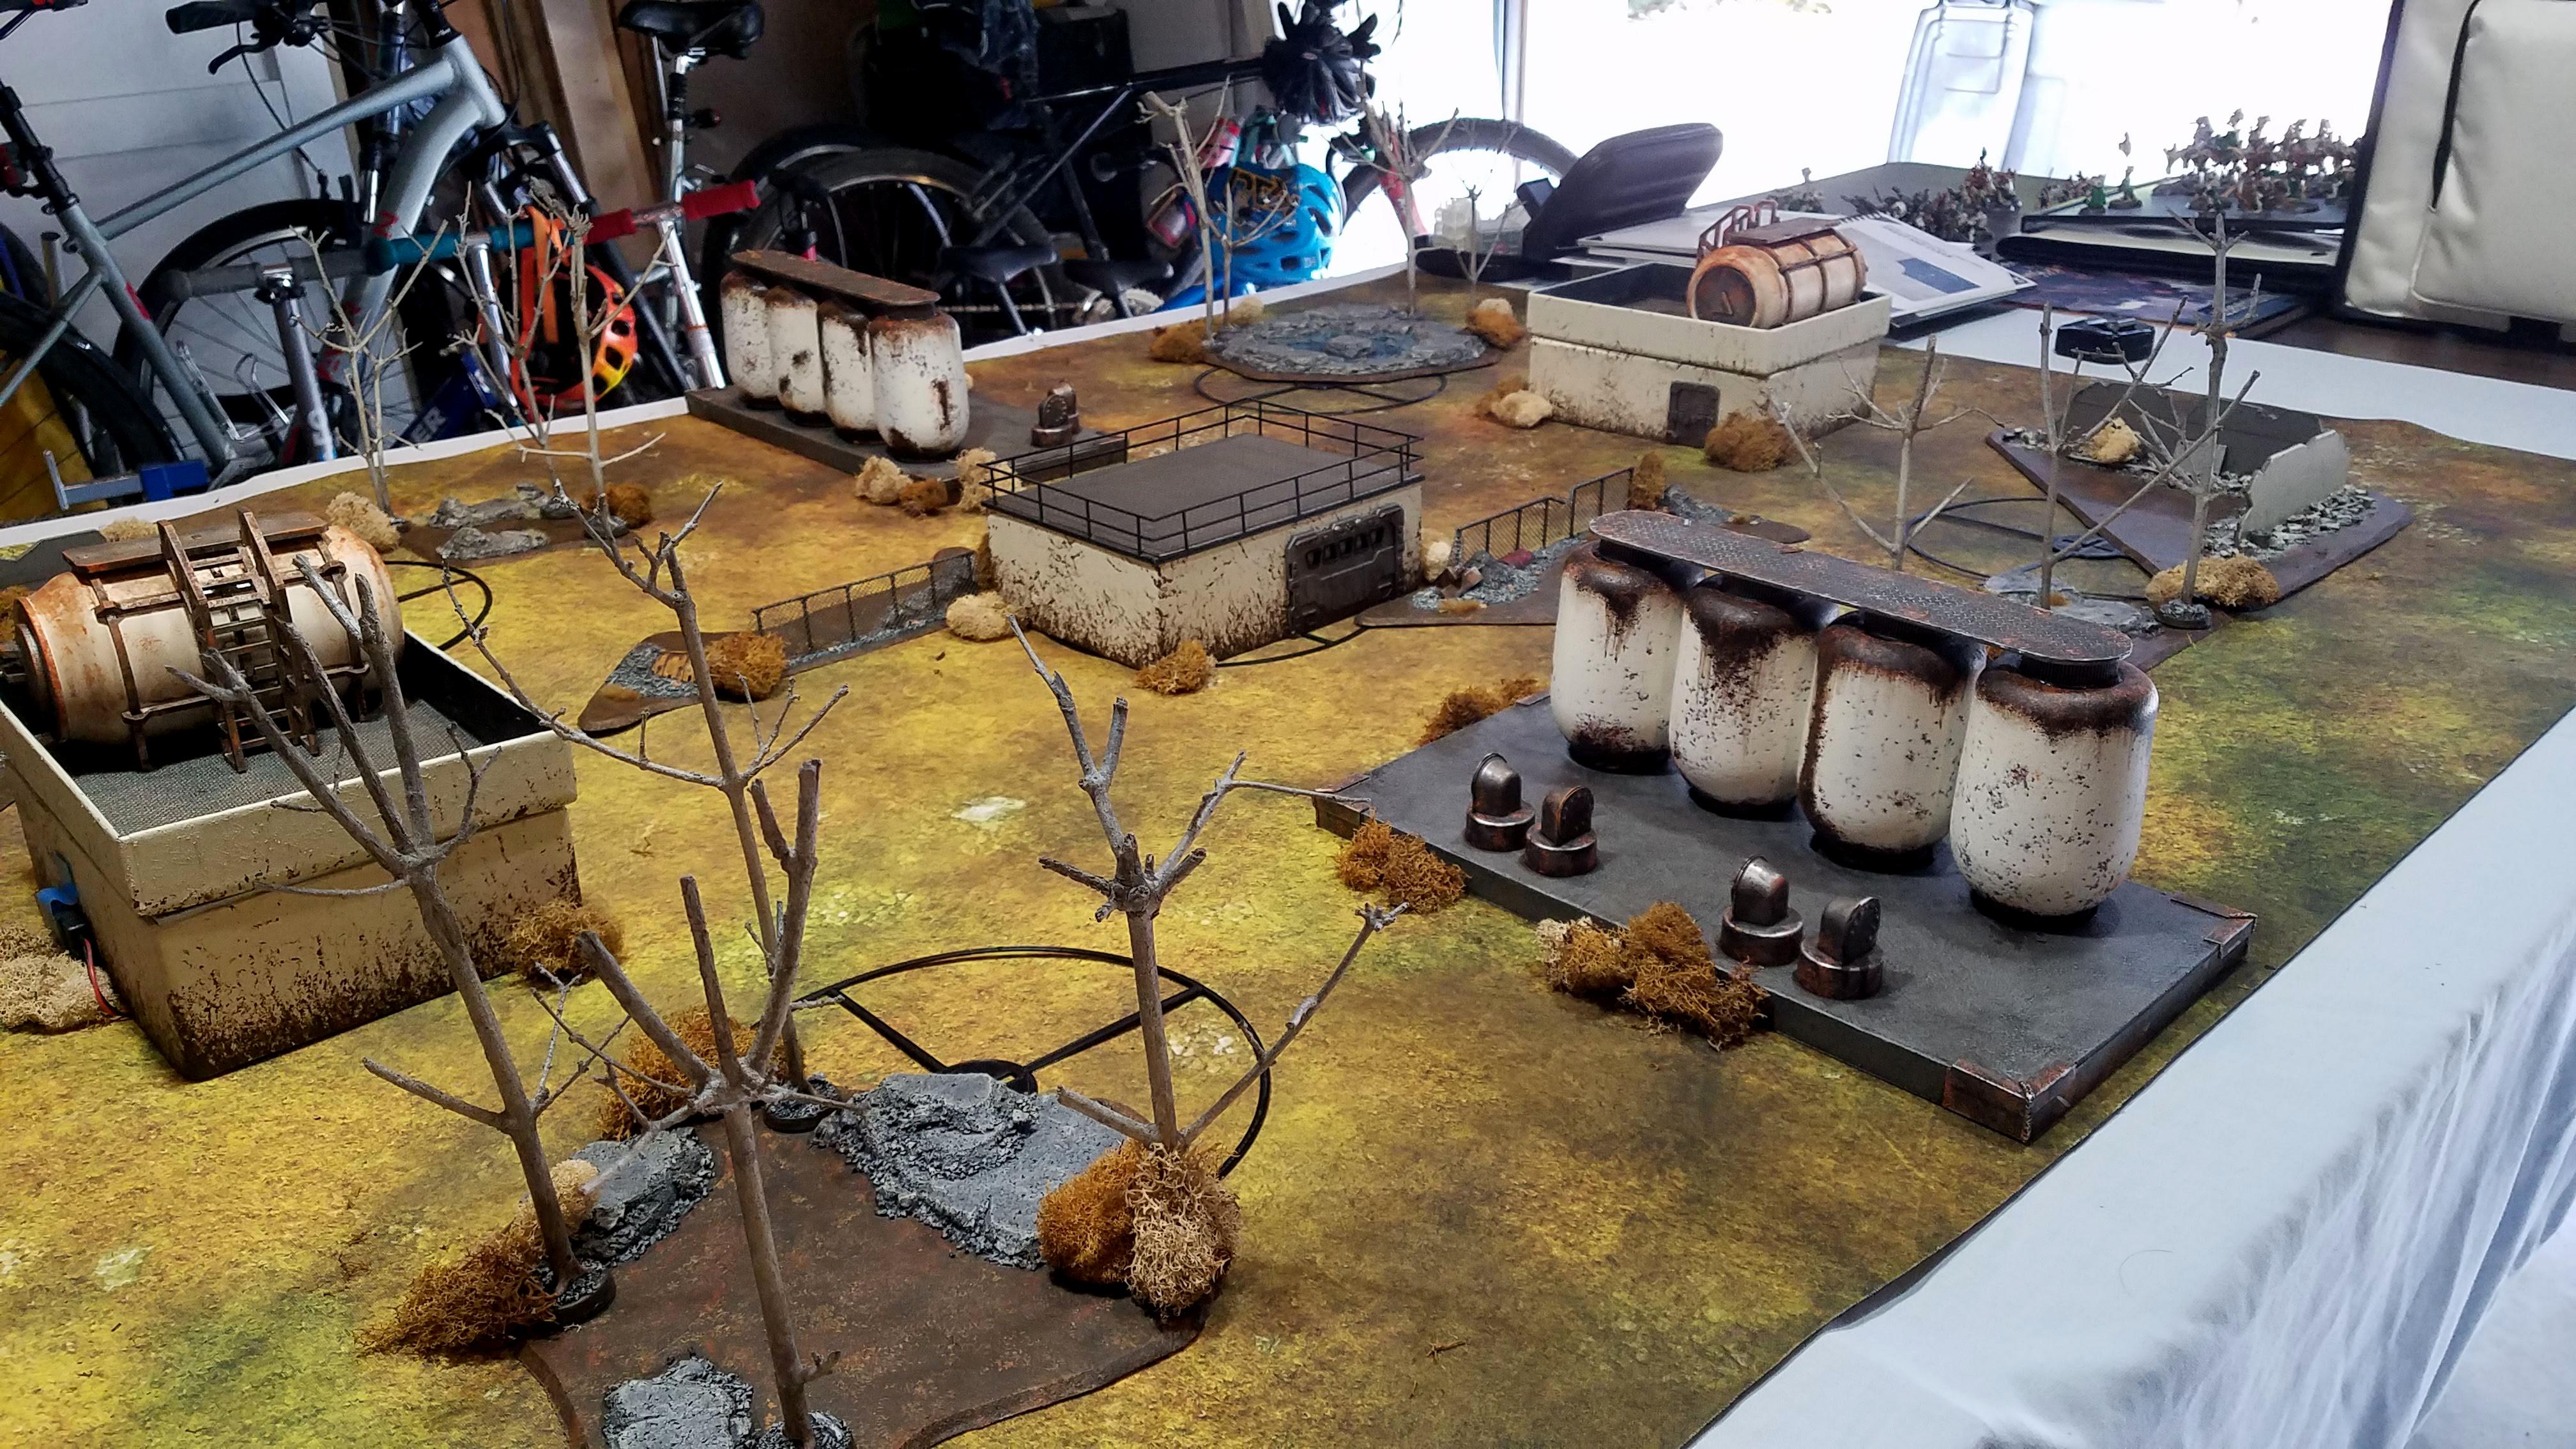 Terrain set-up for a recent game